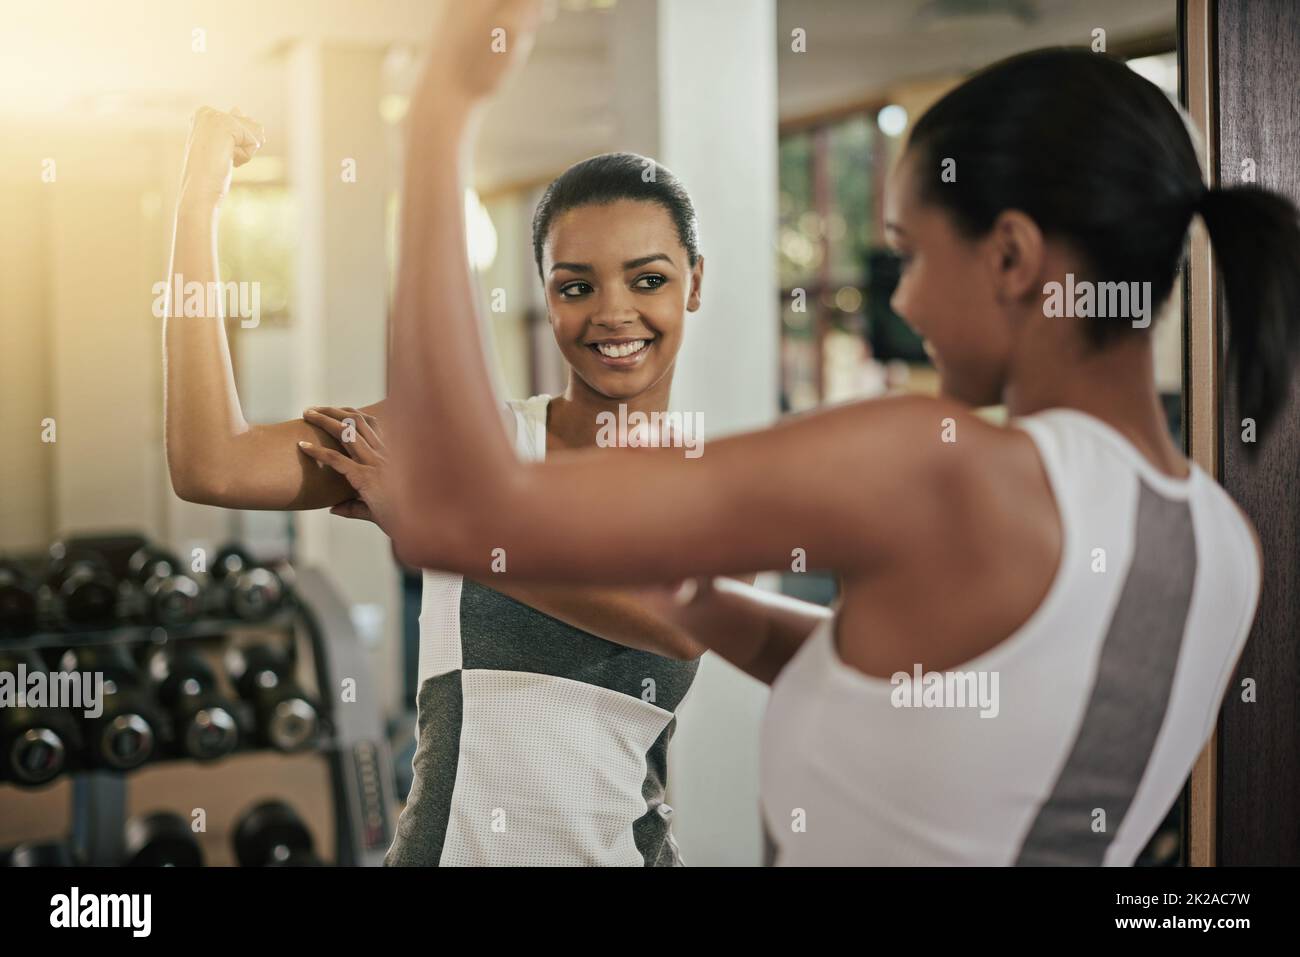 Young African American Woman Flexing Muscles Isolated Over White Background  Stock Photo, Picture and Royalty Free Image. Image 34964348.